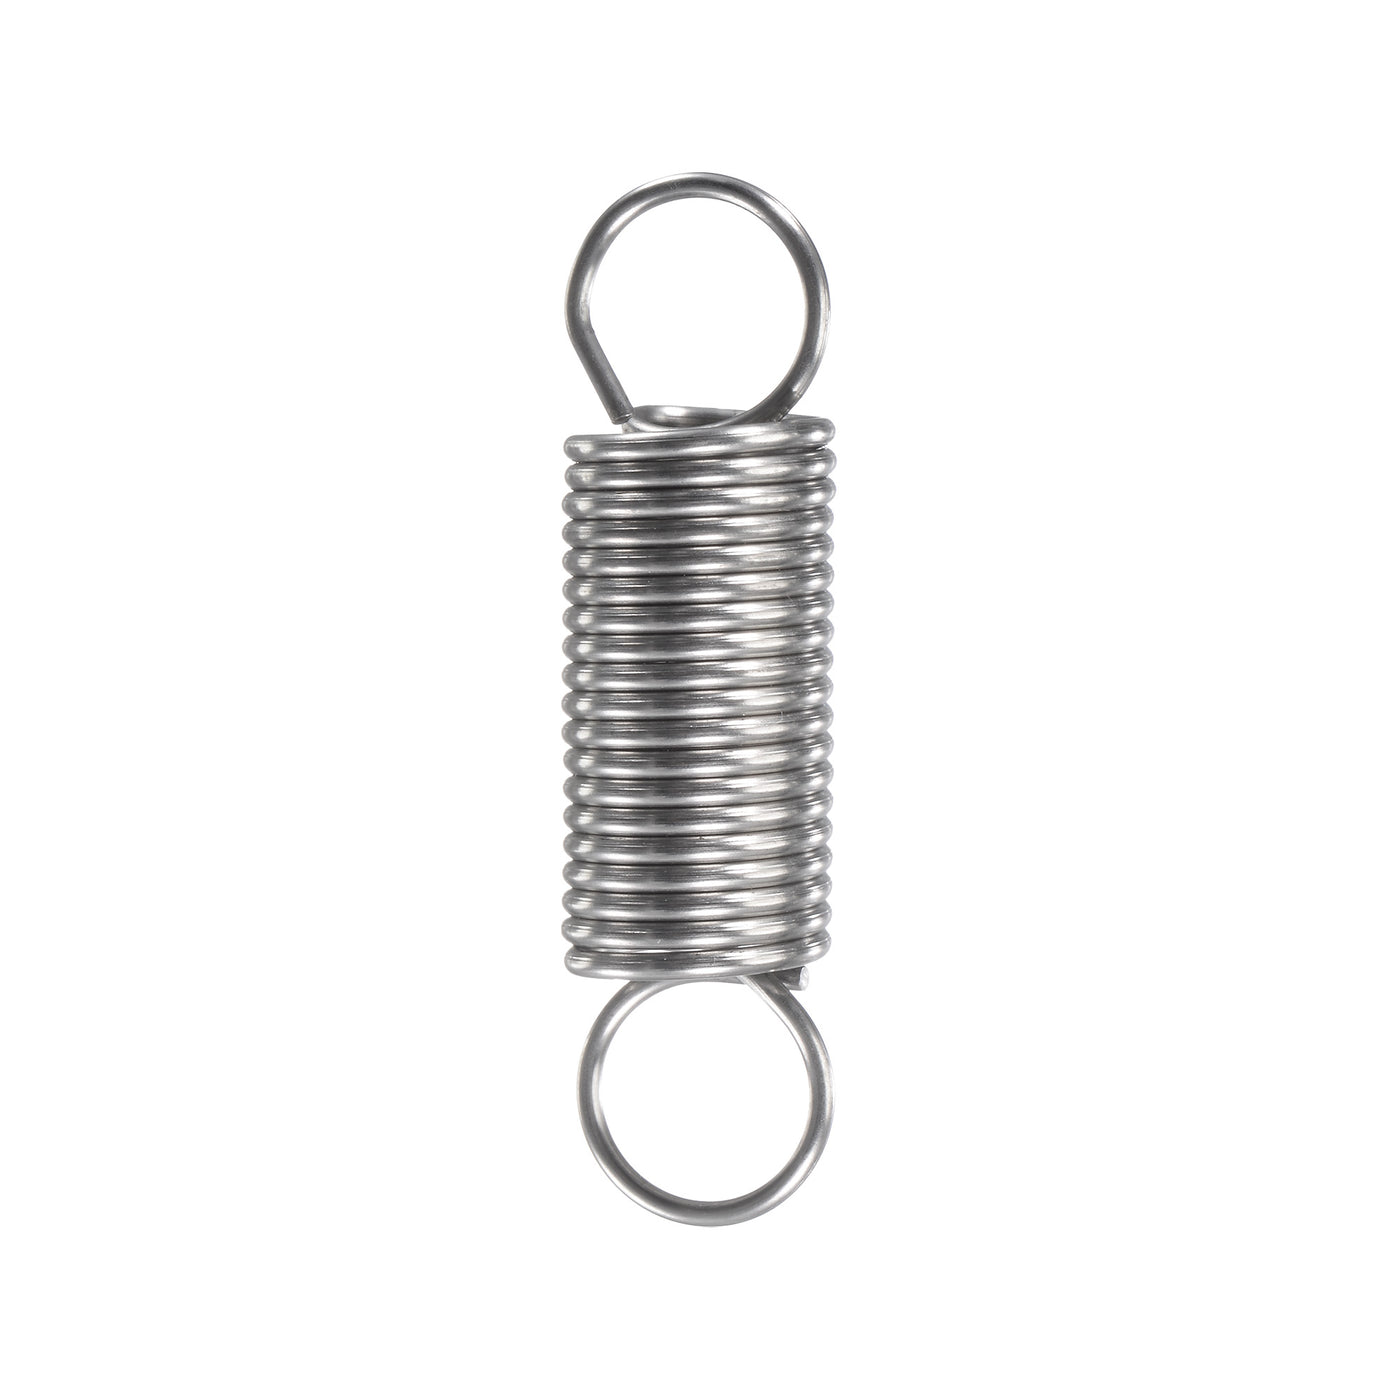 Uxcell Uxcell 1.5mmx15mmx80mm Extended Compression Spring,8.6Lbs Load Capacity,Silver,2pcs